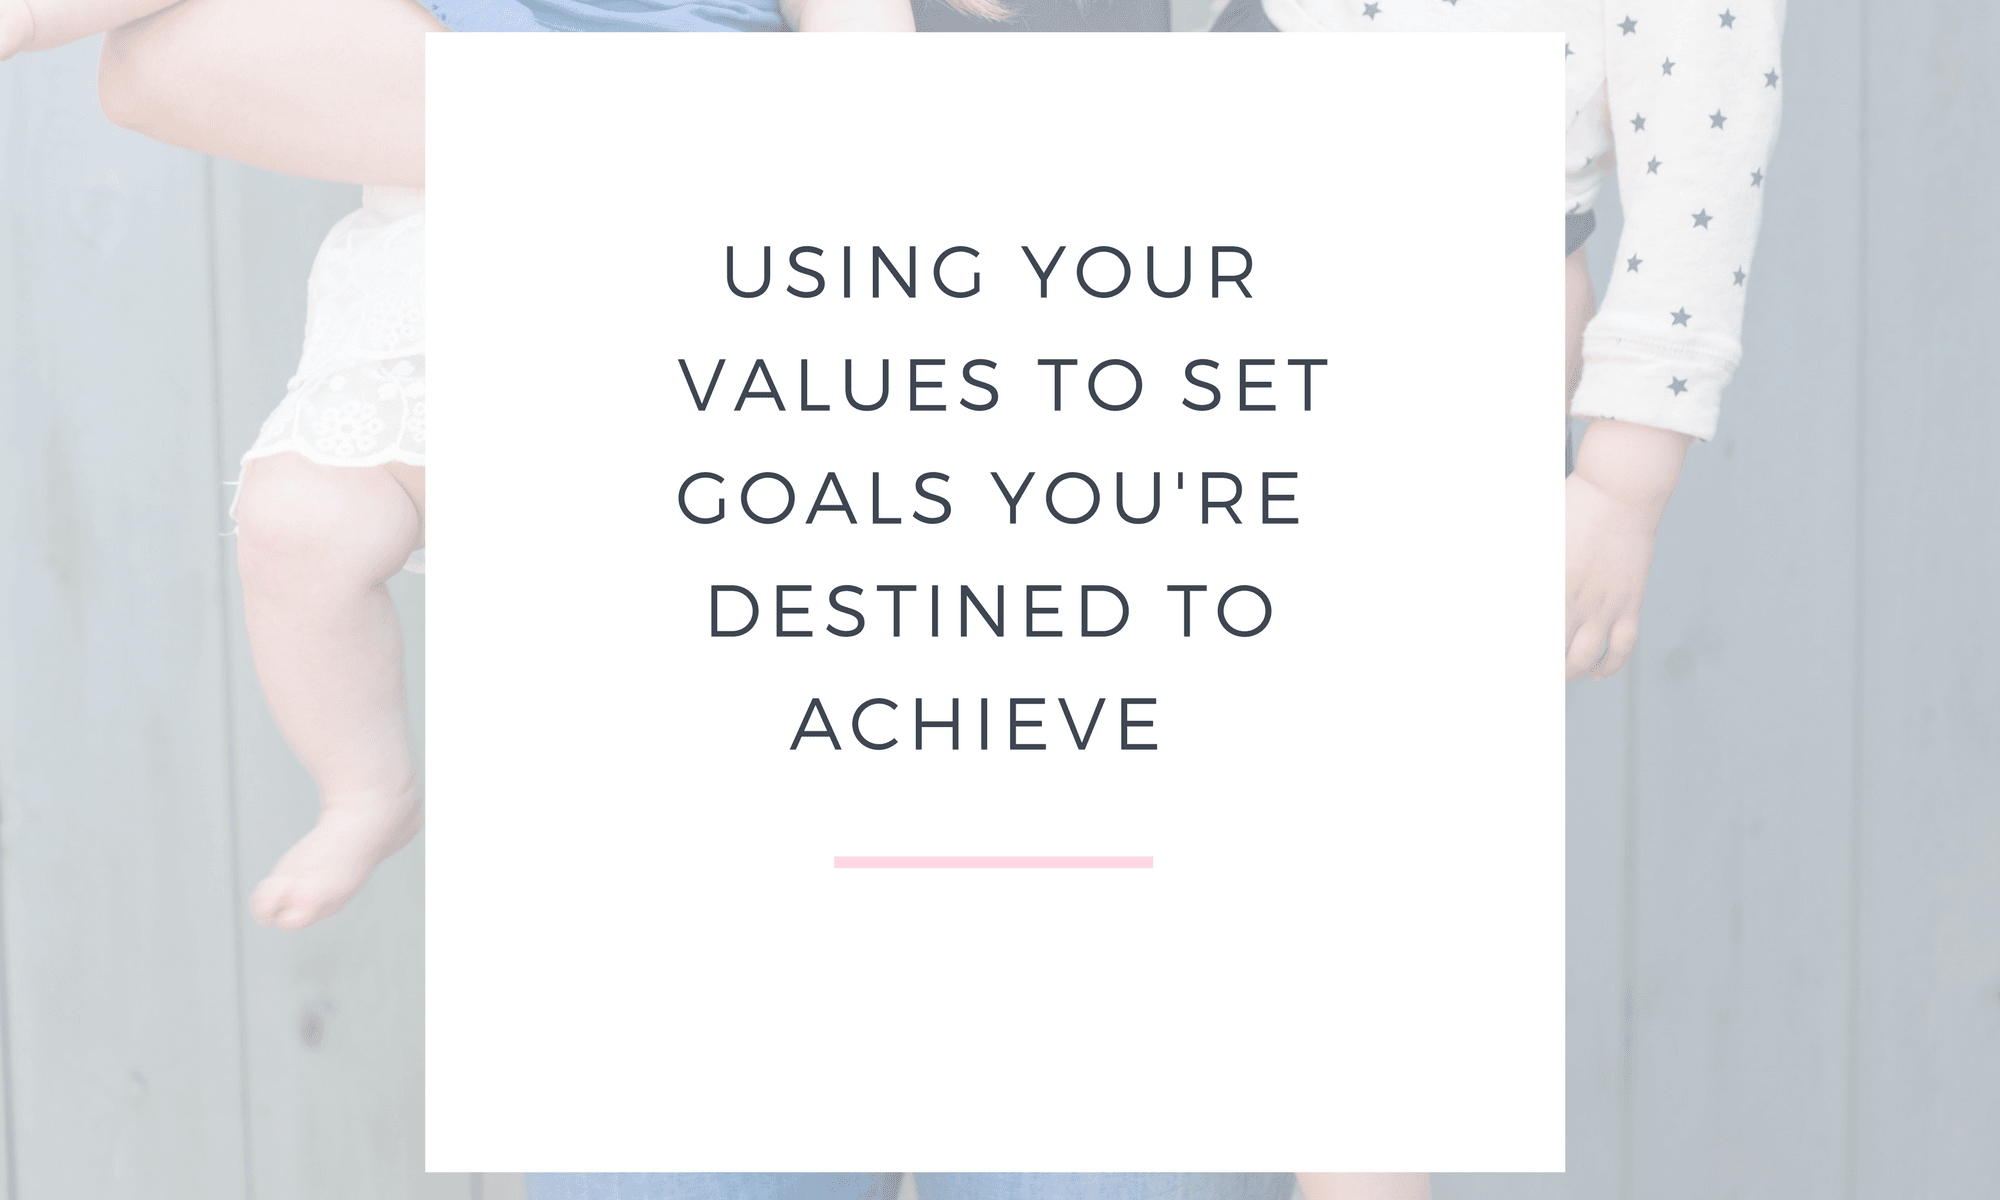 USING YOUR VALUES TO SET GOALS YOU'RE DESTINED TO ACHIEVE